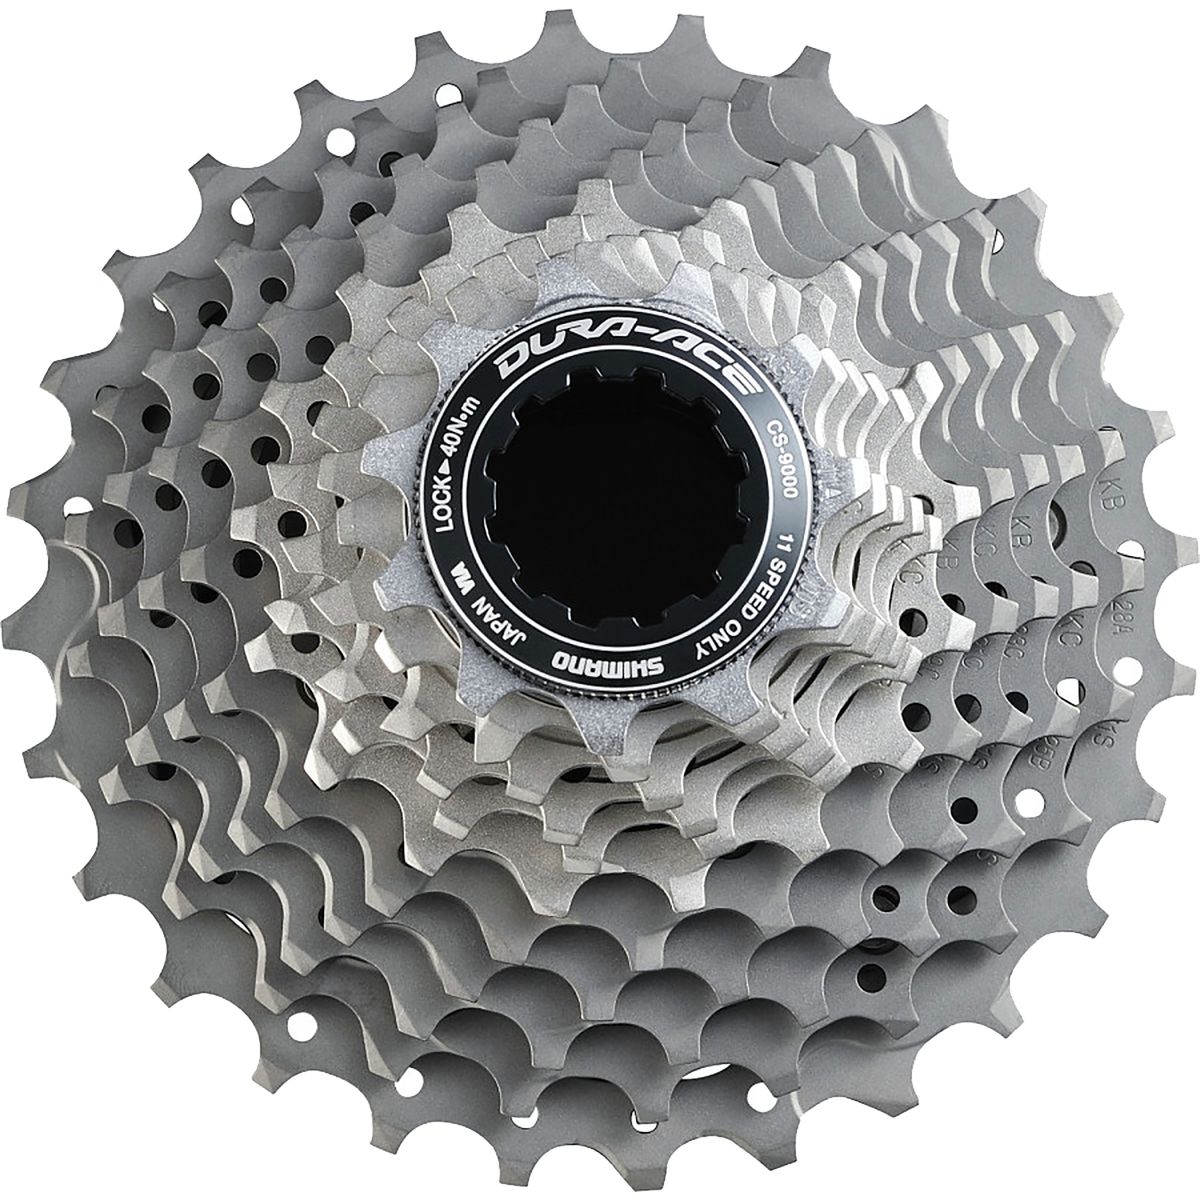 Shimano Dura-Ace CS-9000 11-Speed Cassette - Components